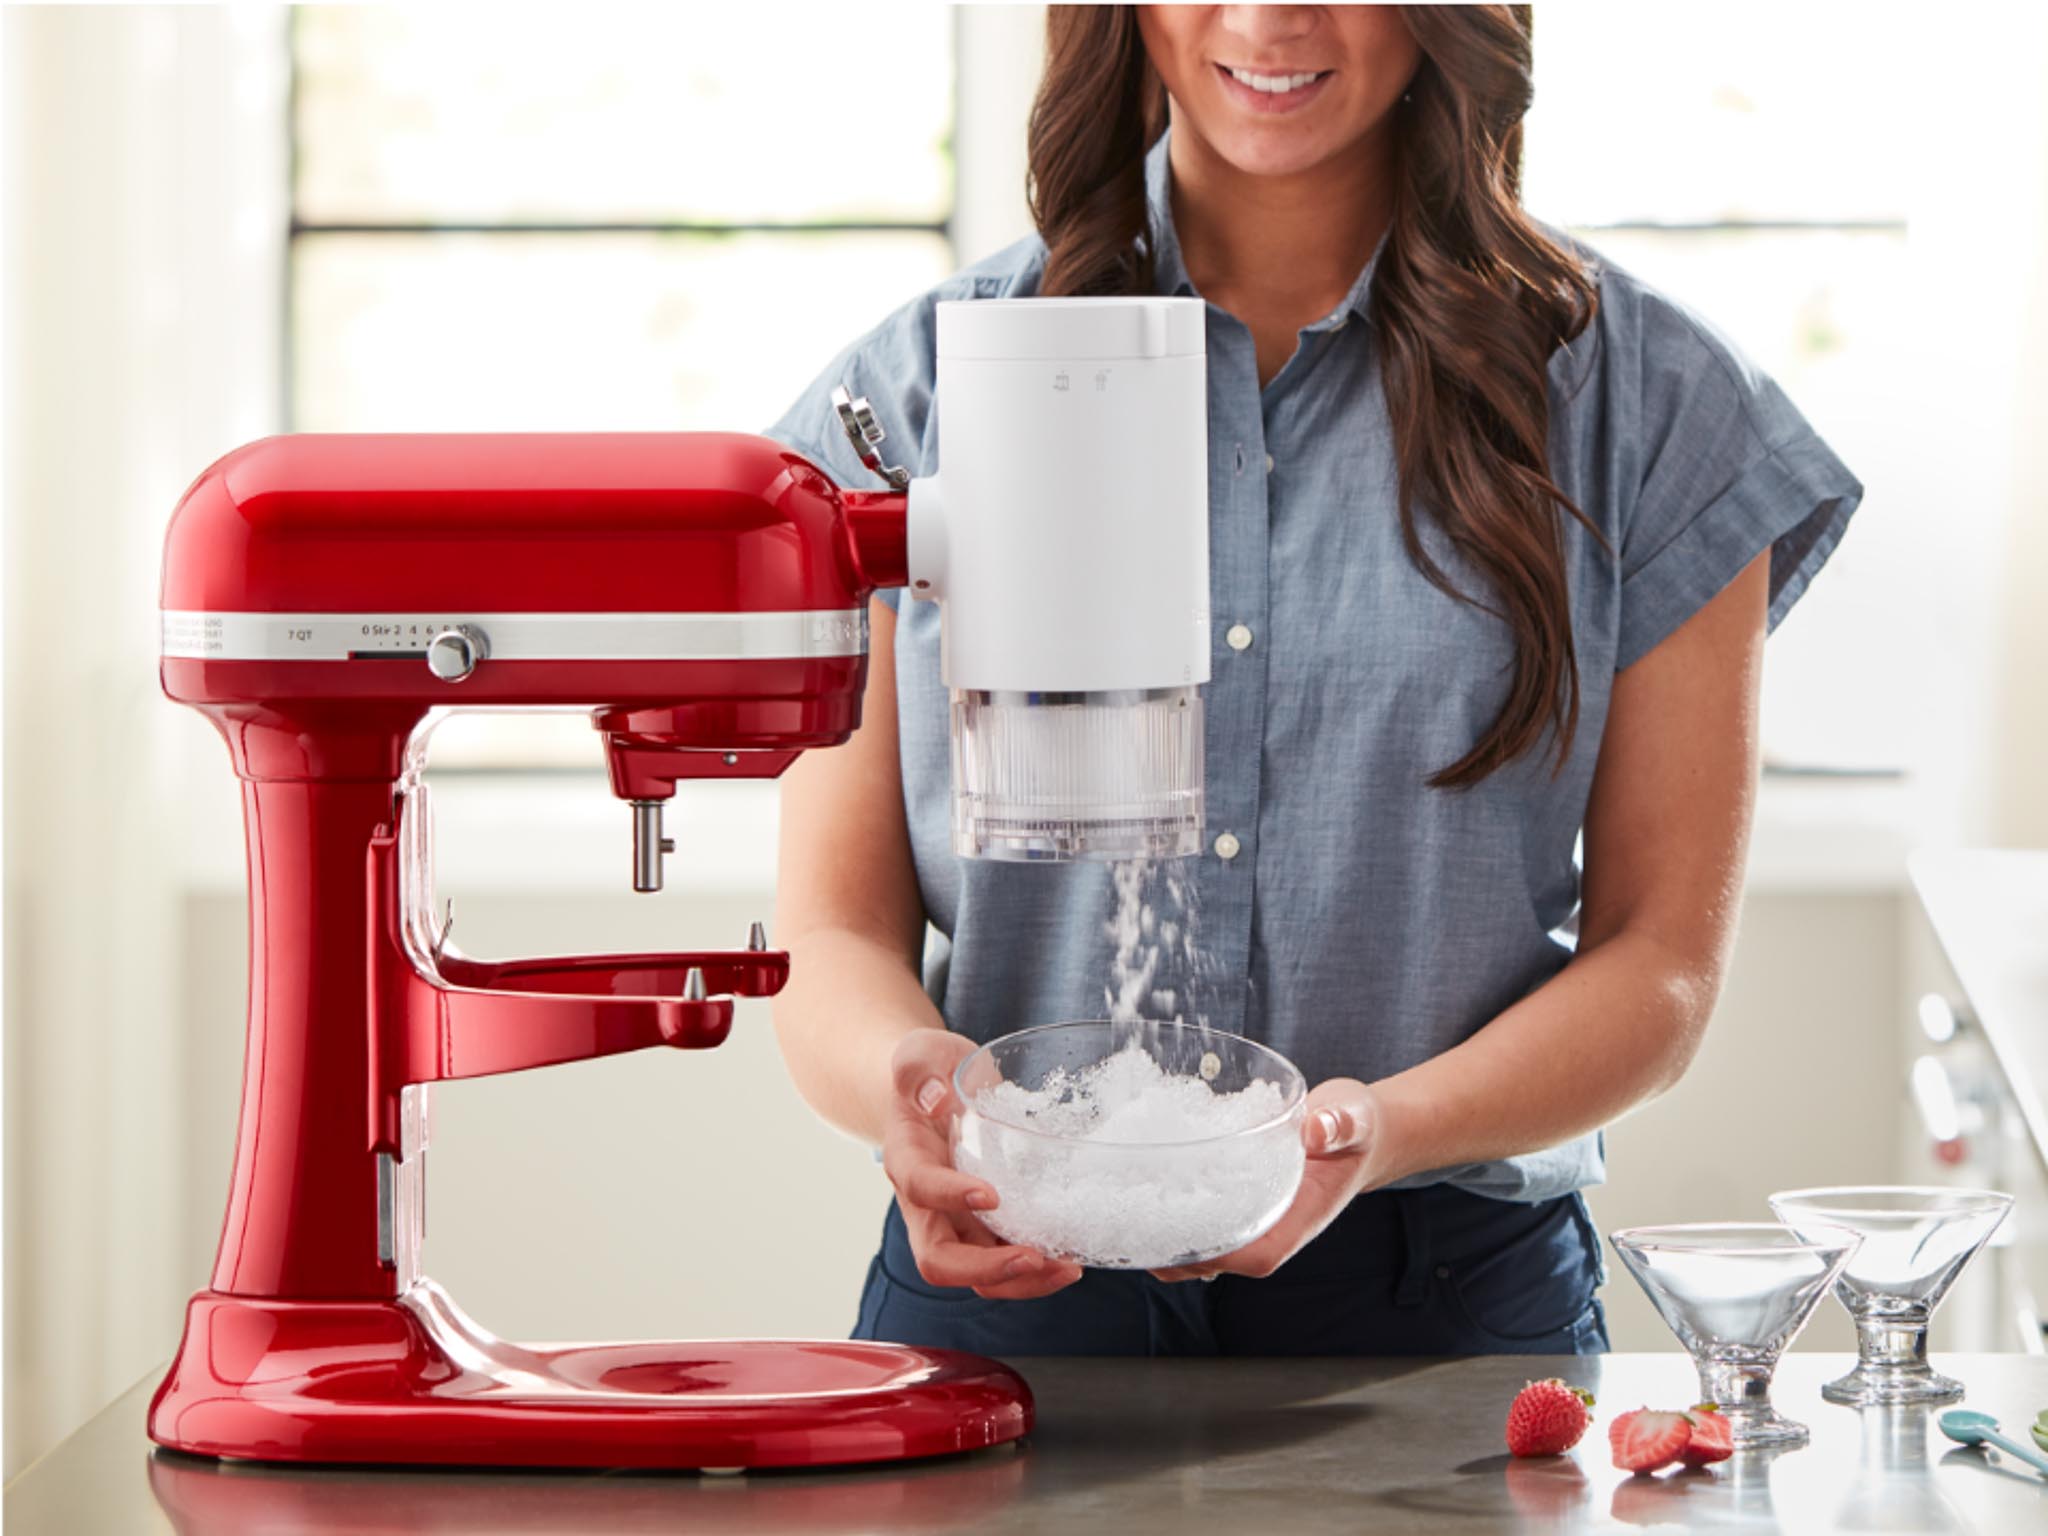 Mixer Attachments Shave Ice Maker Woman Making Shave Ice